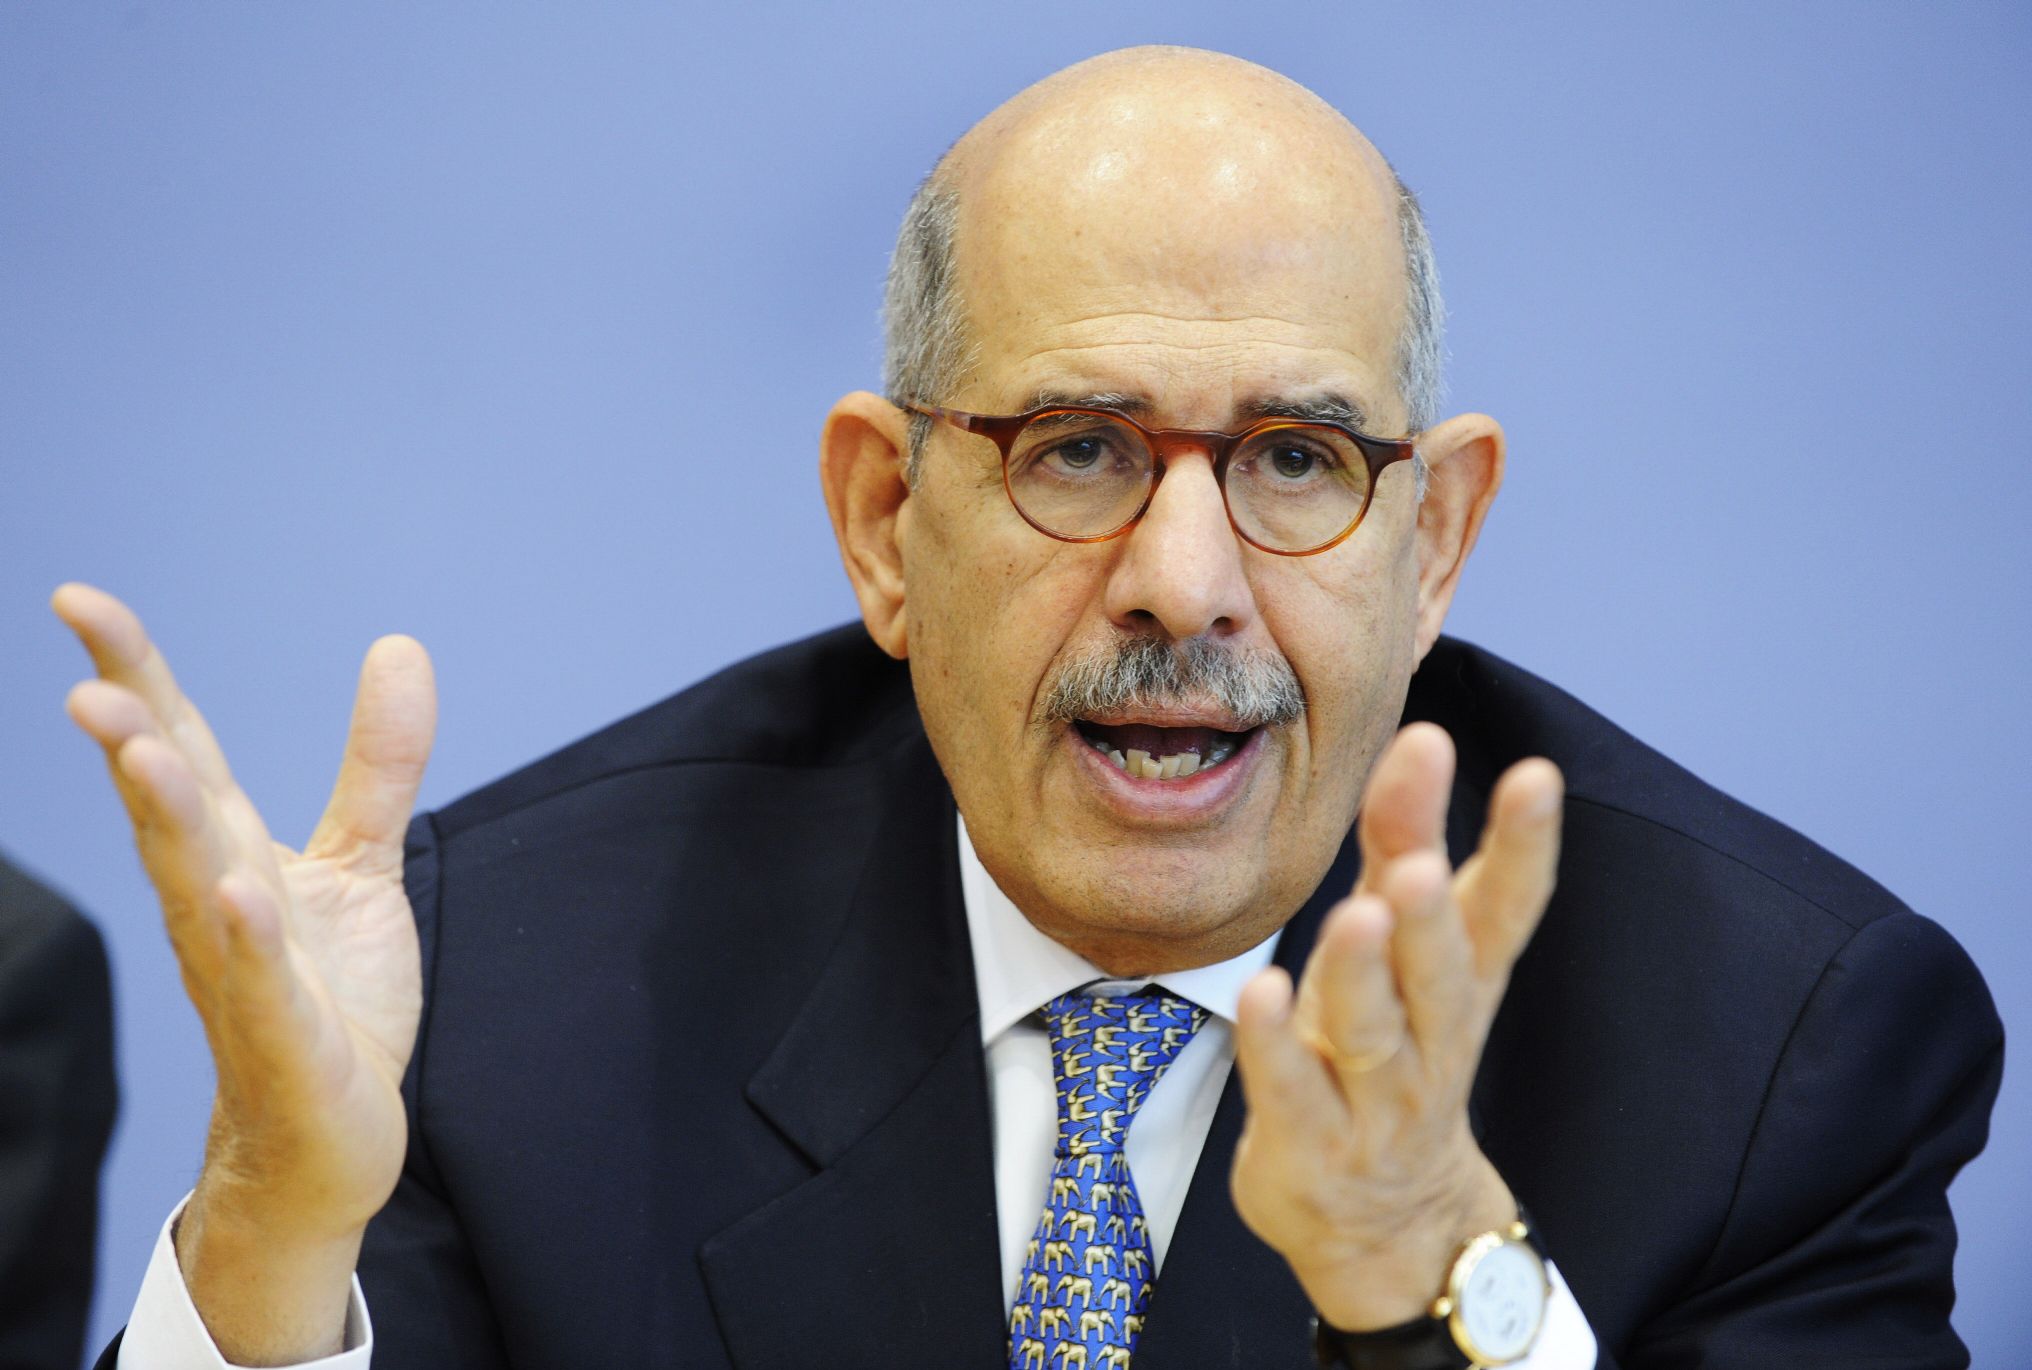 El-Baradei to the Egyptian people: Hold still!